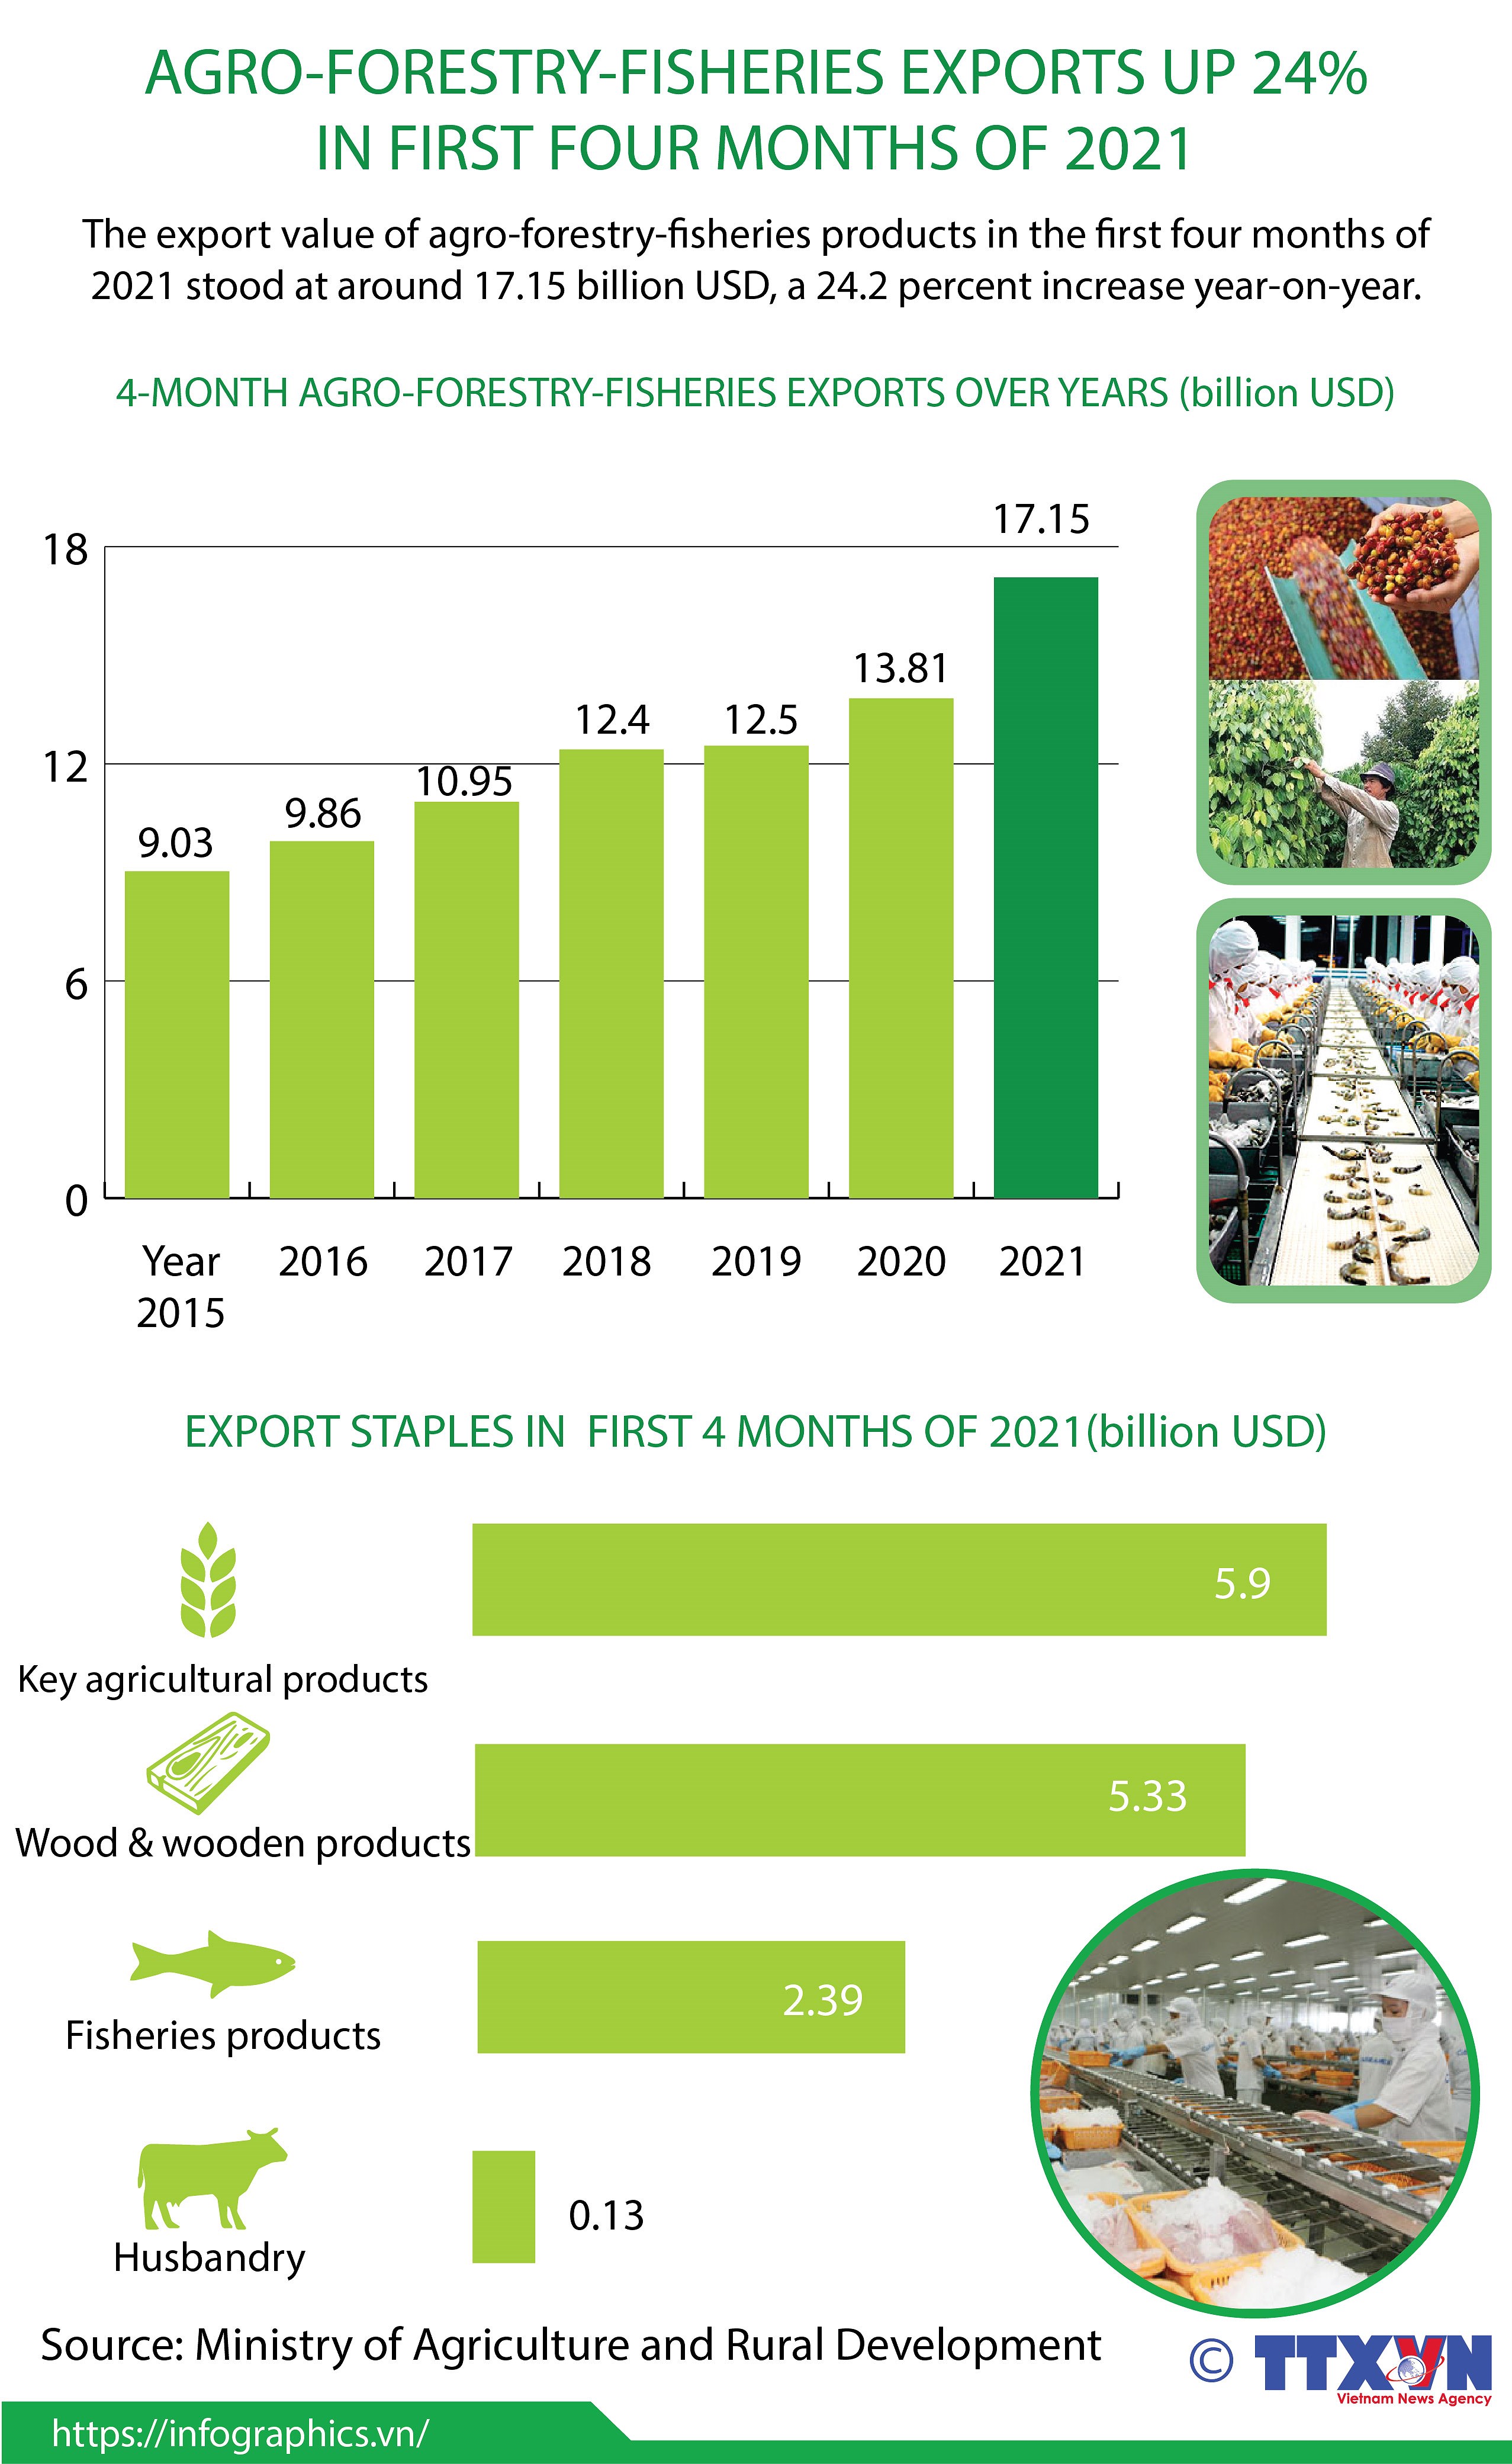 Agro-forestry-fisheries exports up 24% in first four months of 2021 hinh anh 1